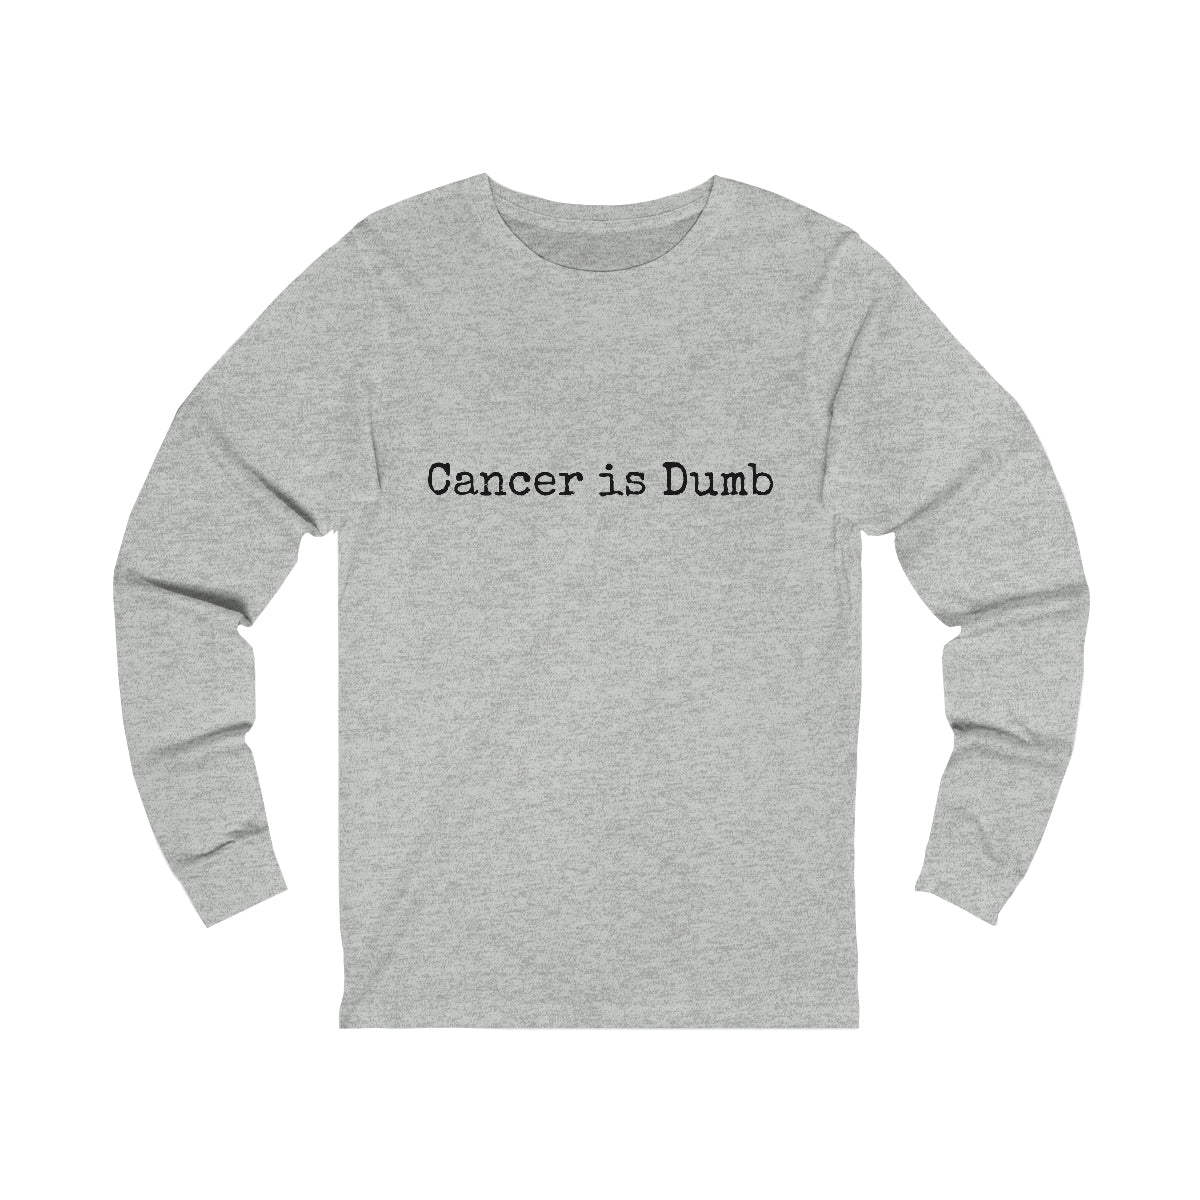 Unisex Jersey Long Sleeve Tee T Shirt tshirt Mens Womens Apparel Clothing Anti Cancer Cancer is Dumb Survivor Support Humorous Funny